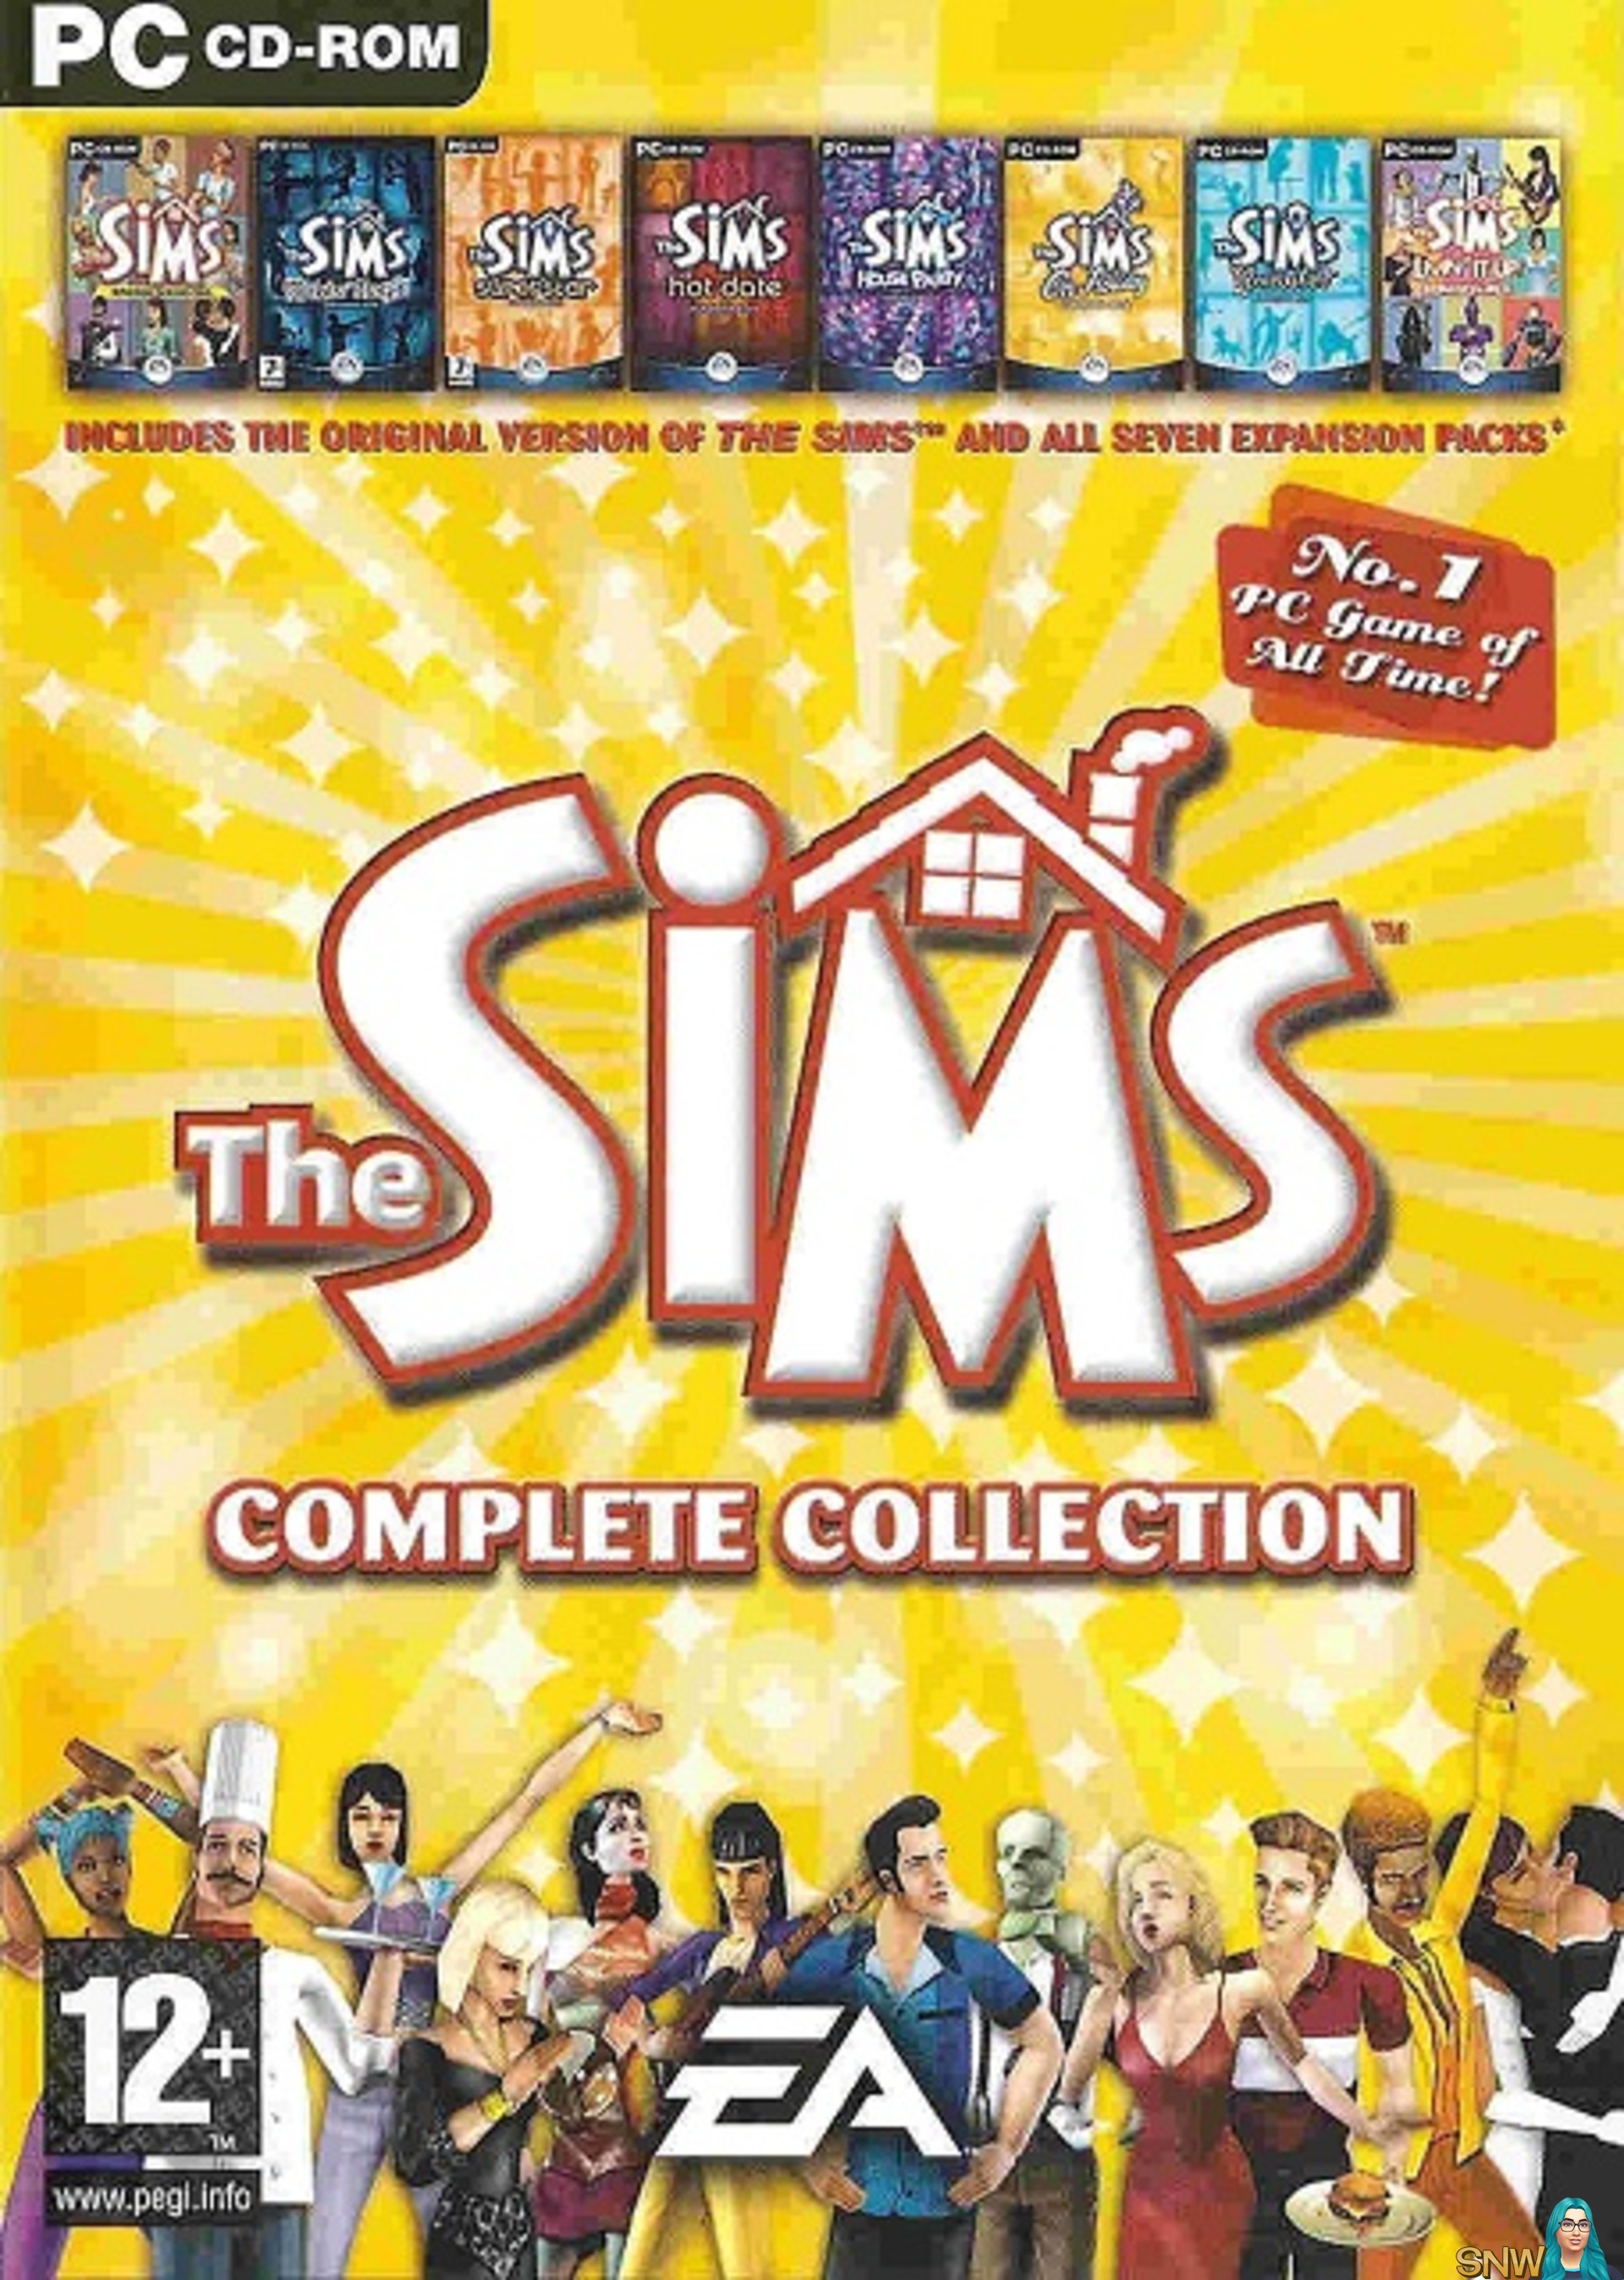 The sims 4 pc complete collection download